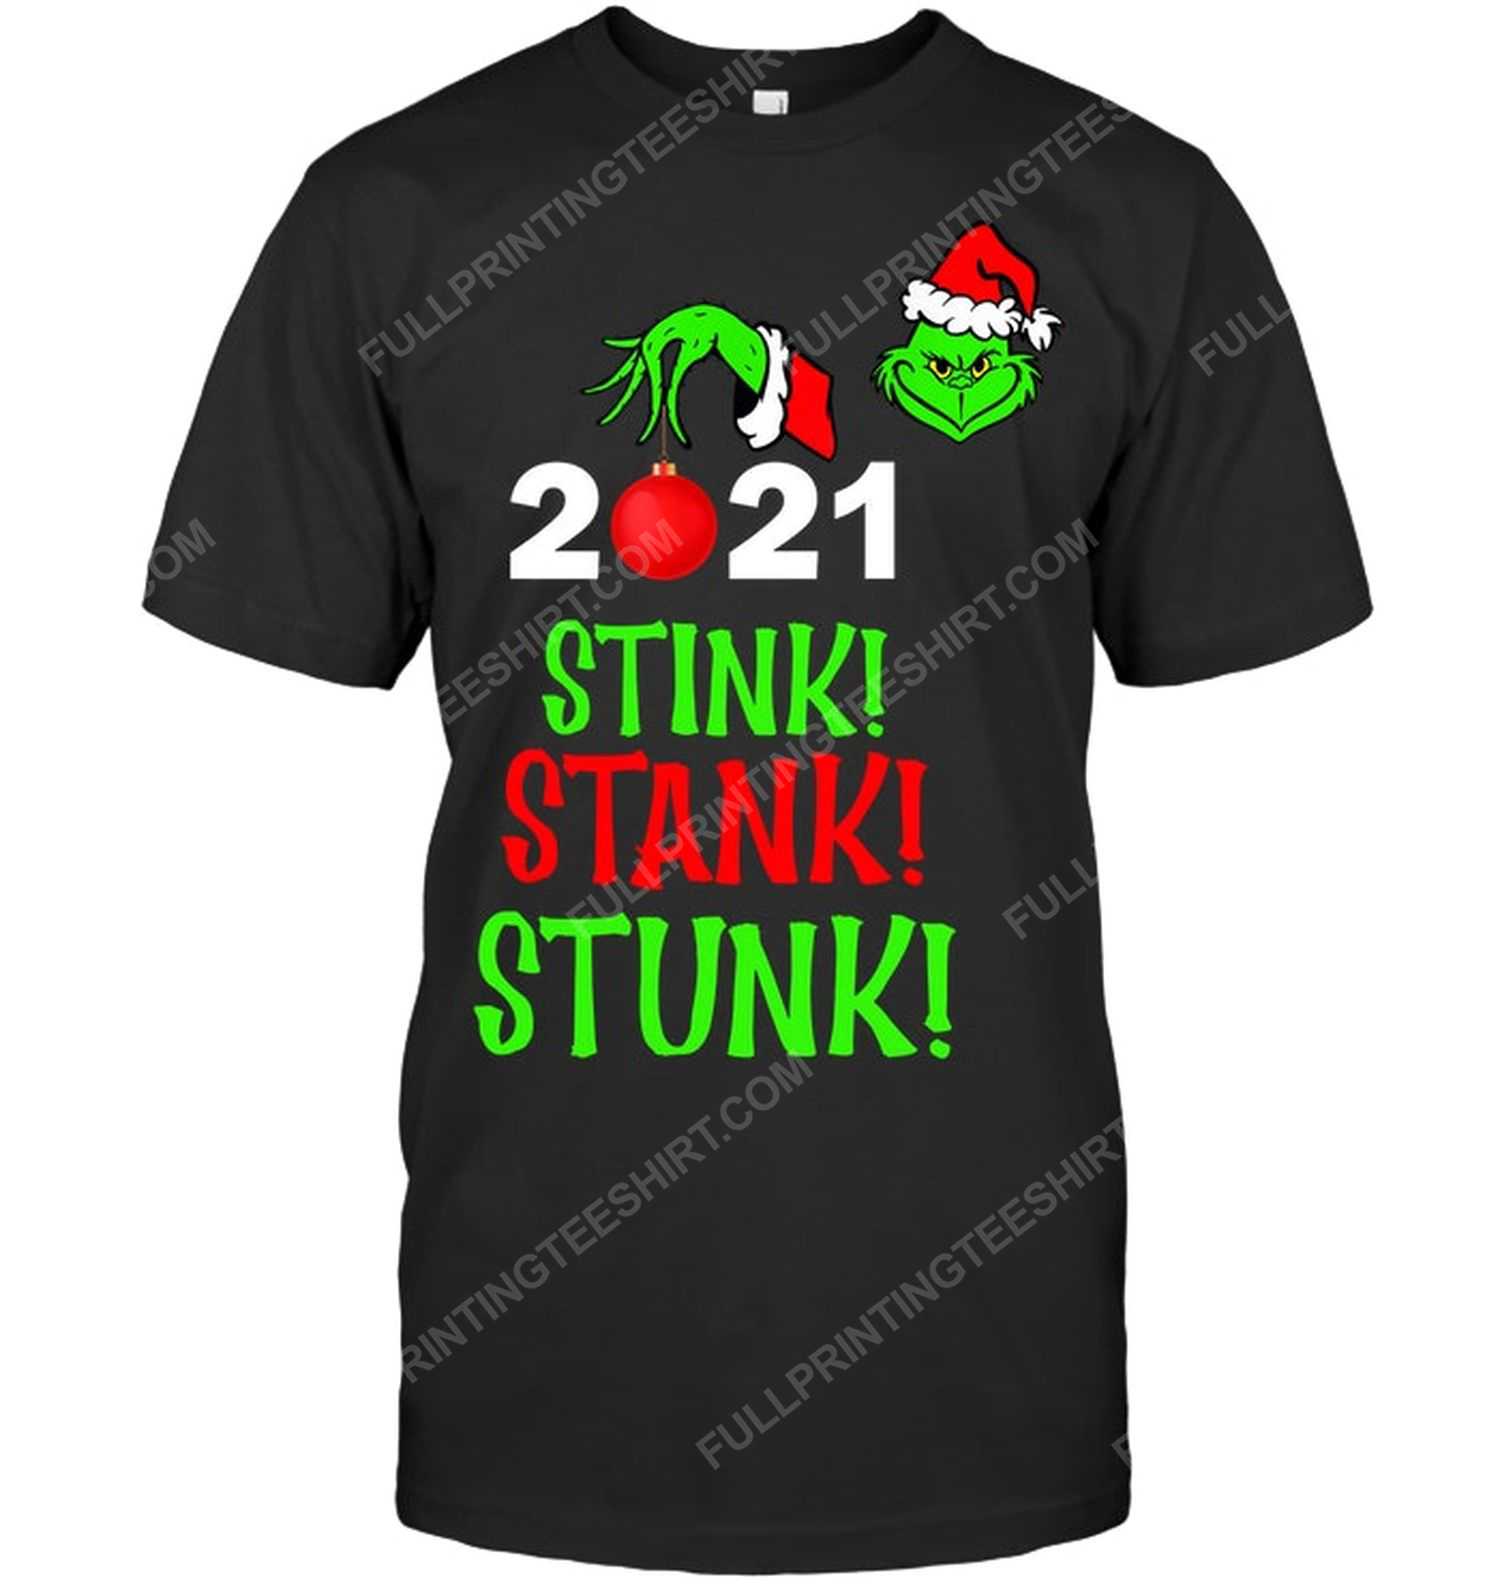 For christmas the grinch stink stank stunk 2021 tshirt